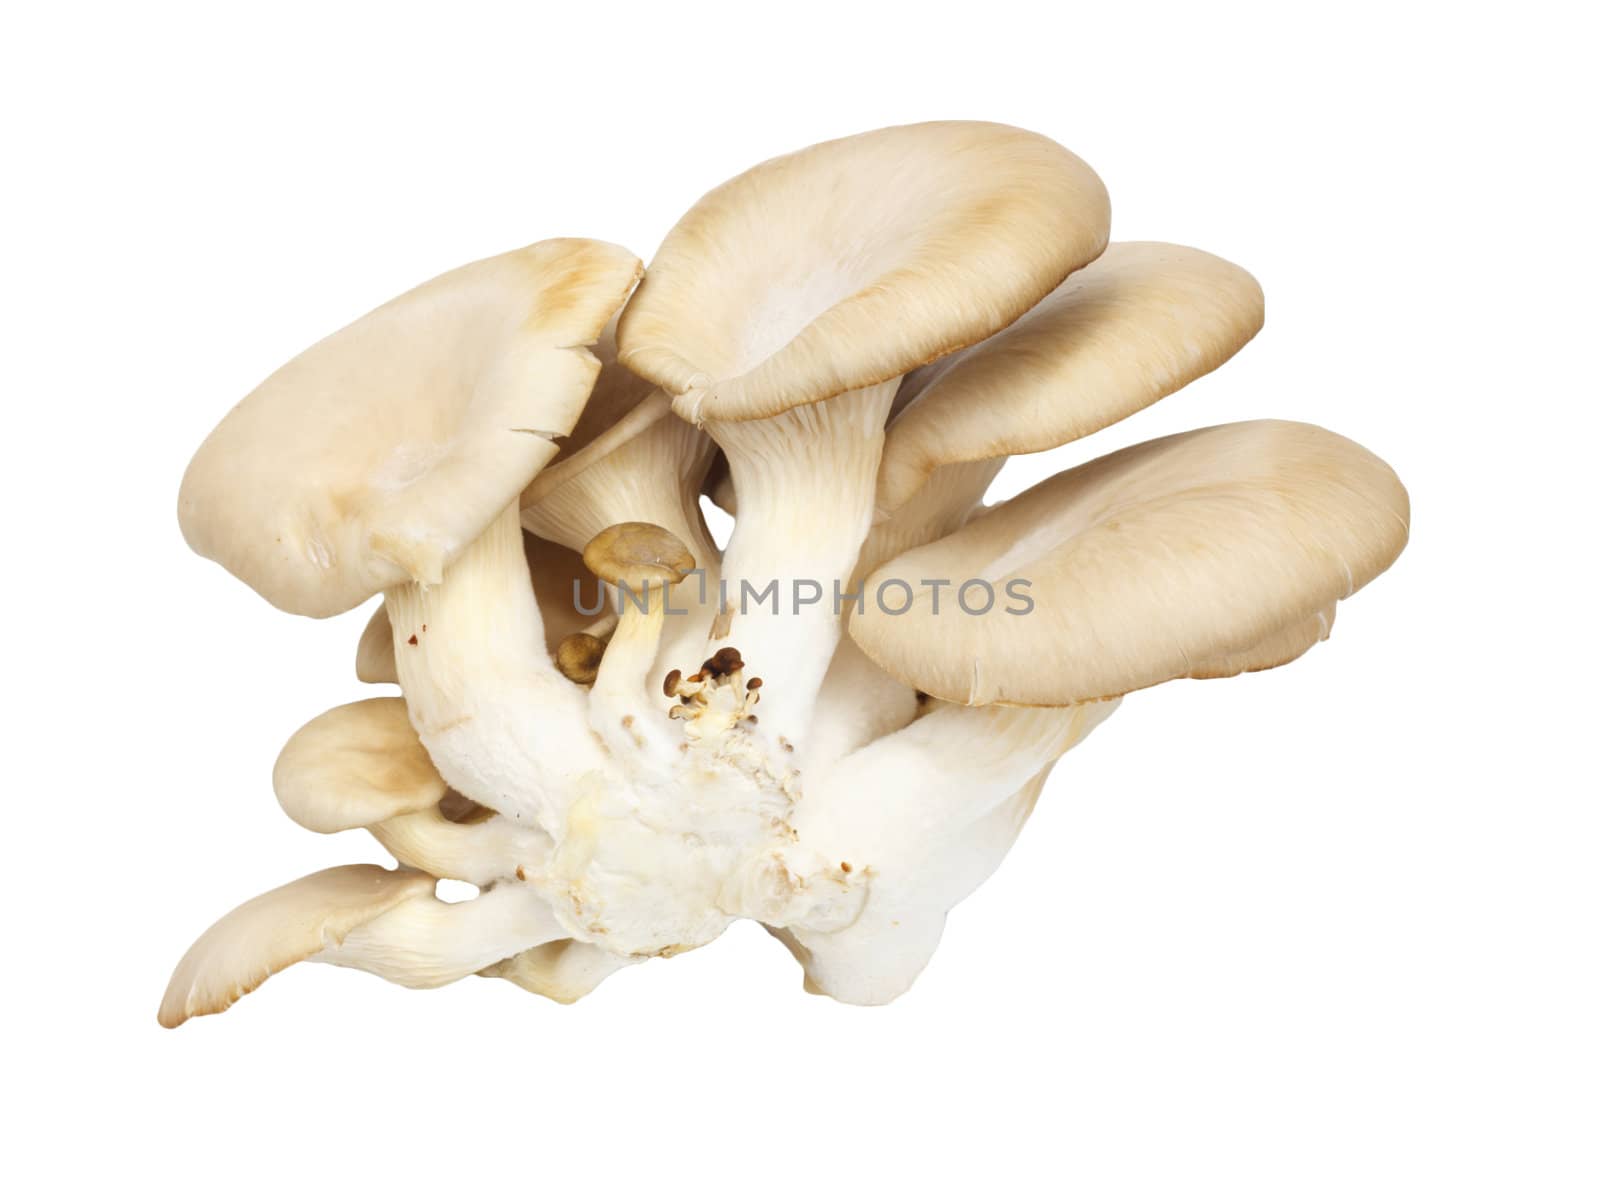 Oyster mushrooms on a white background  by schankz